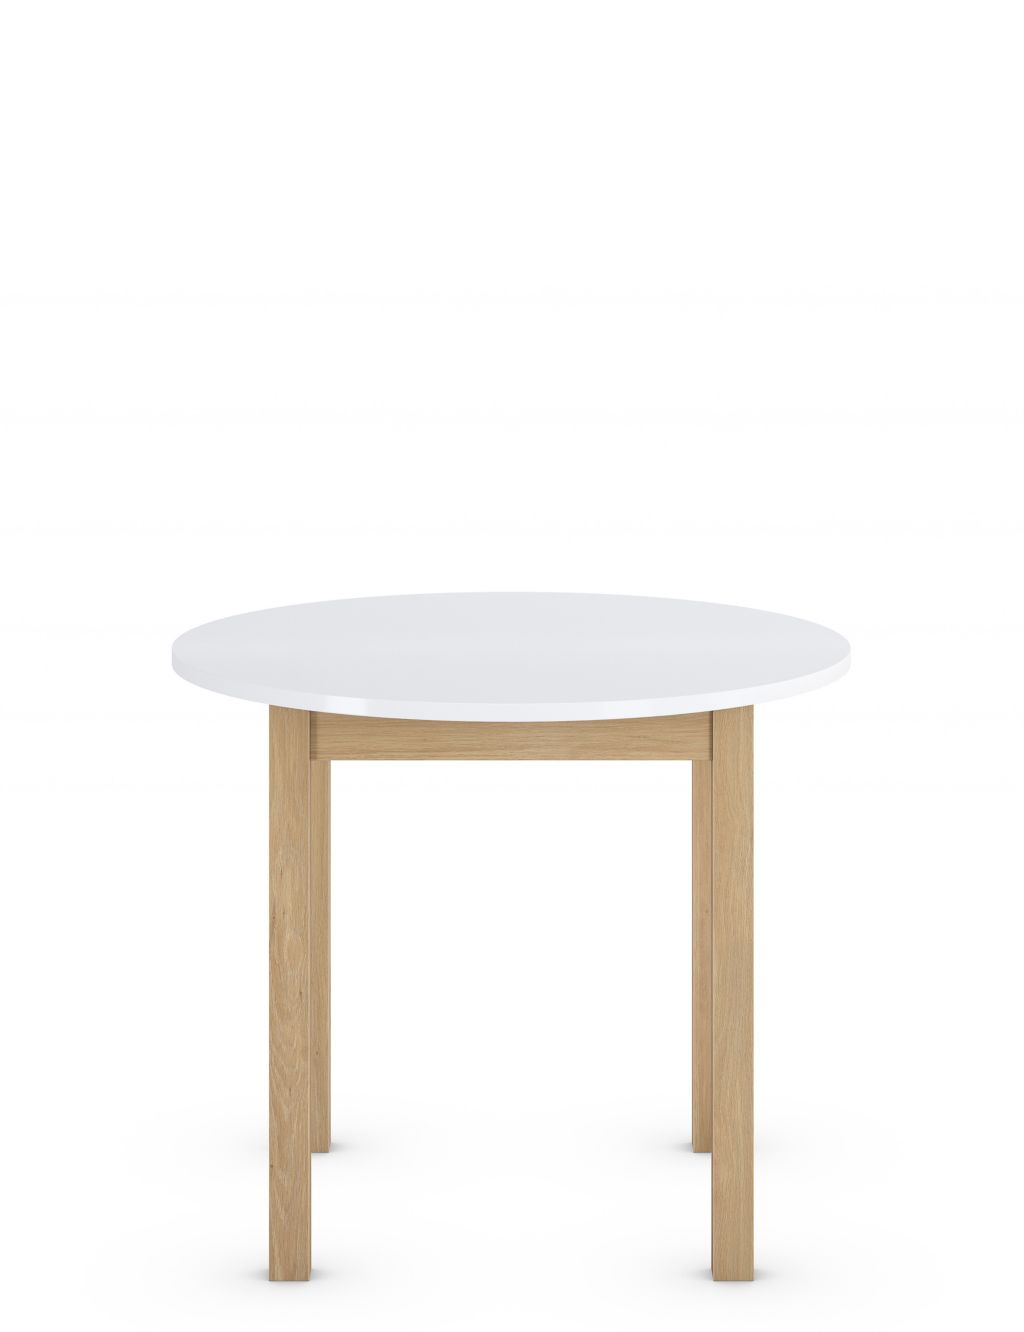 Round 4 Seater Dining Table image 2